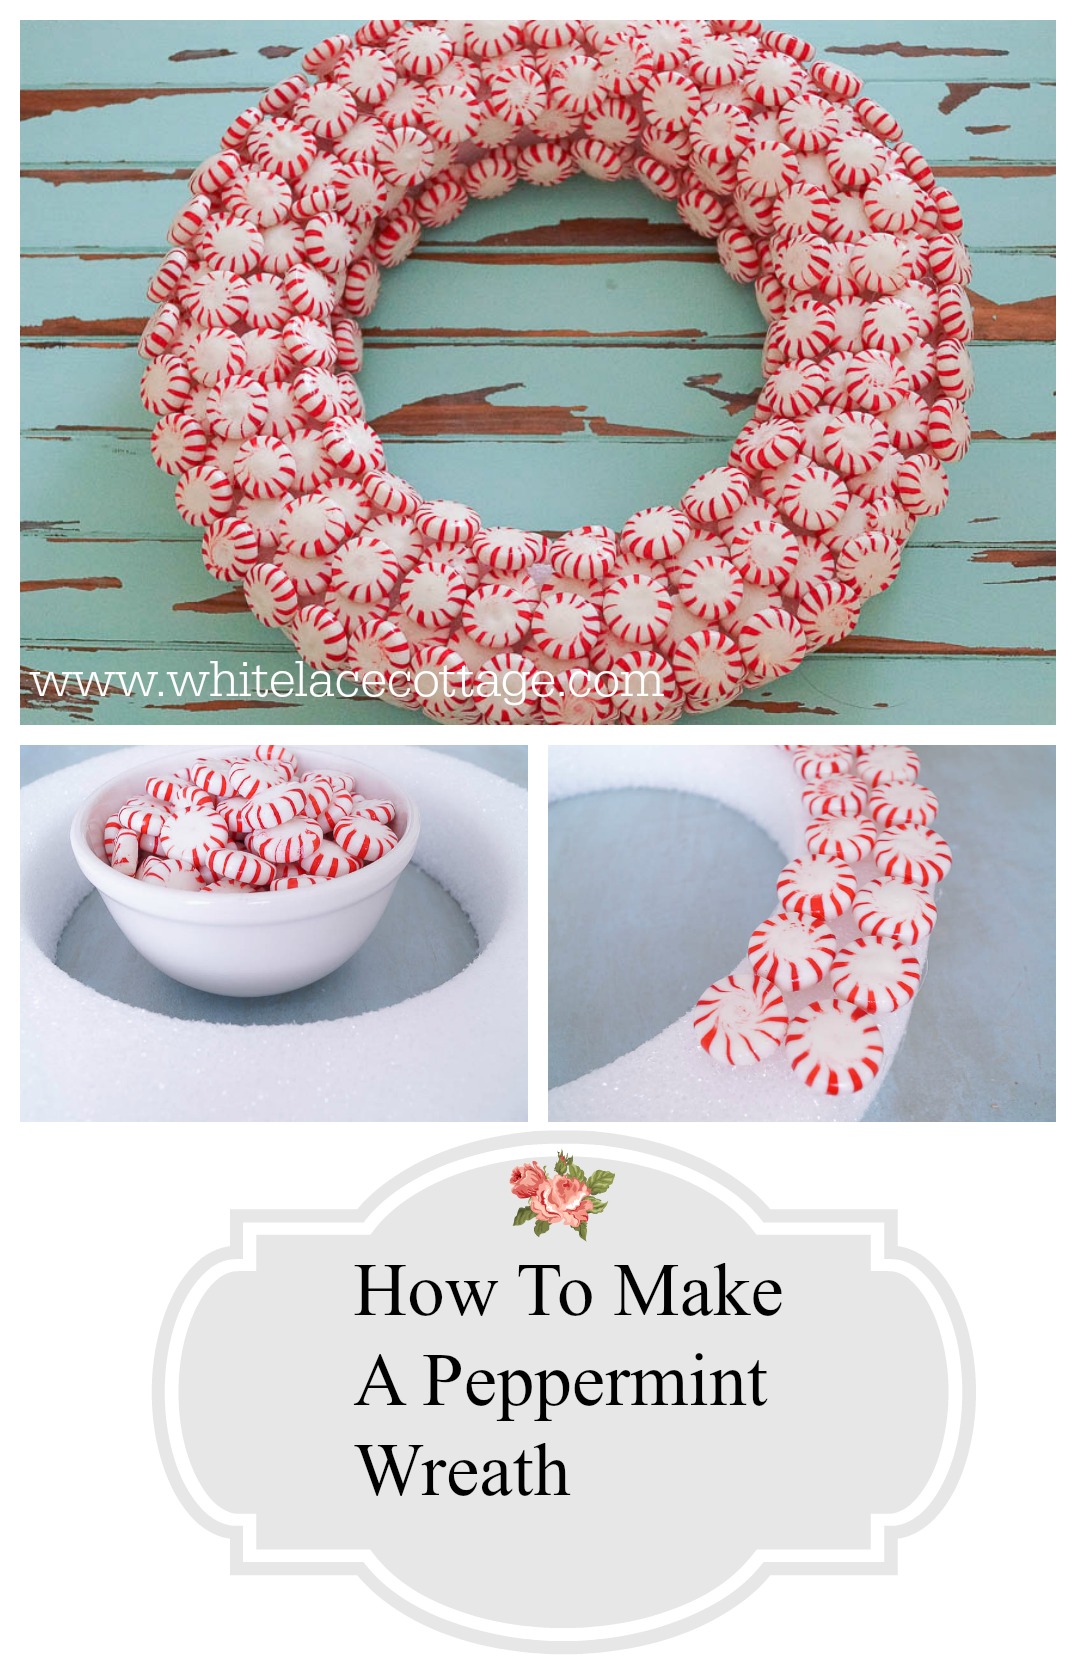 How To Make A Peppermint Wreath